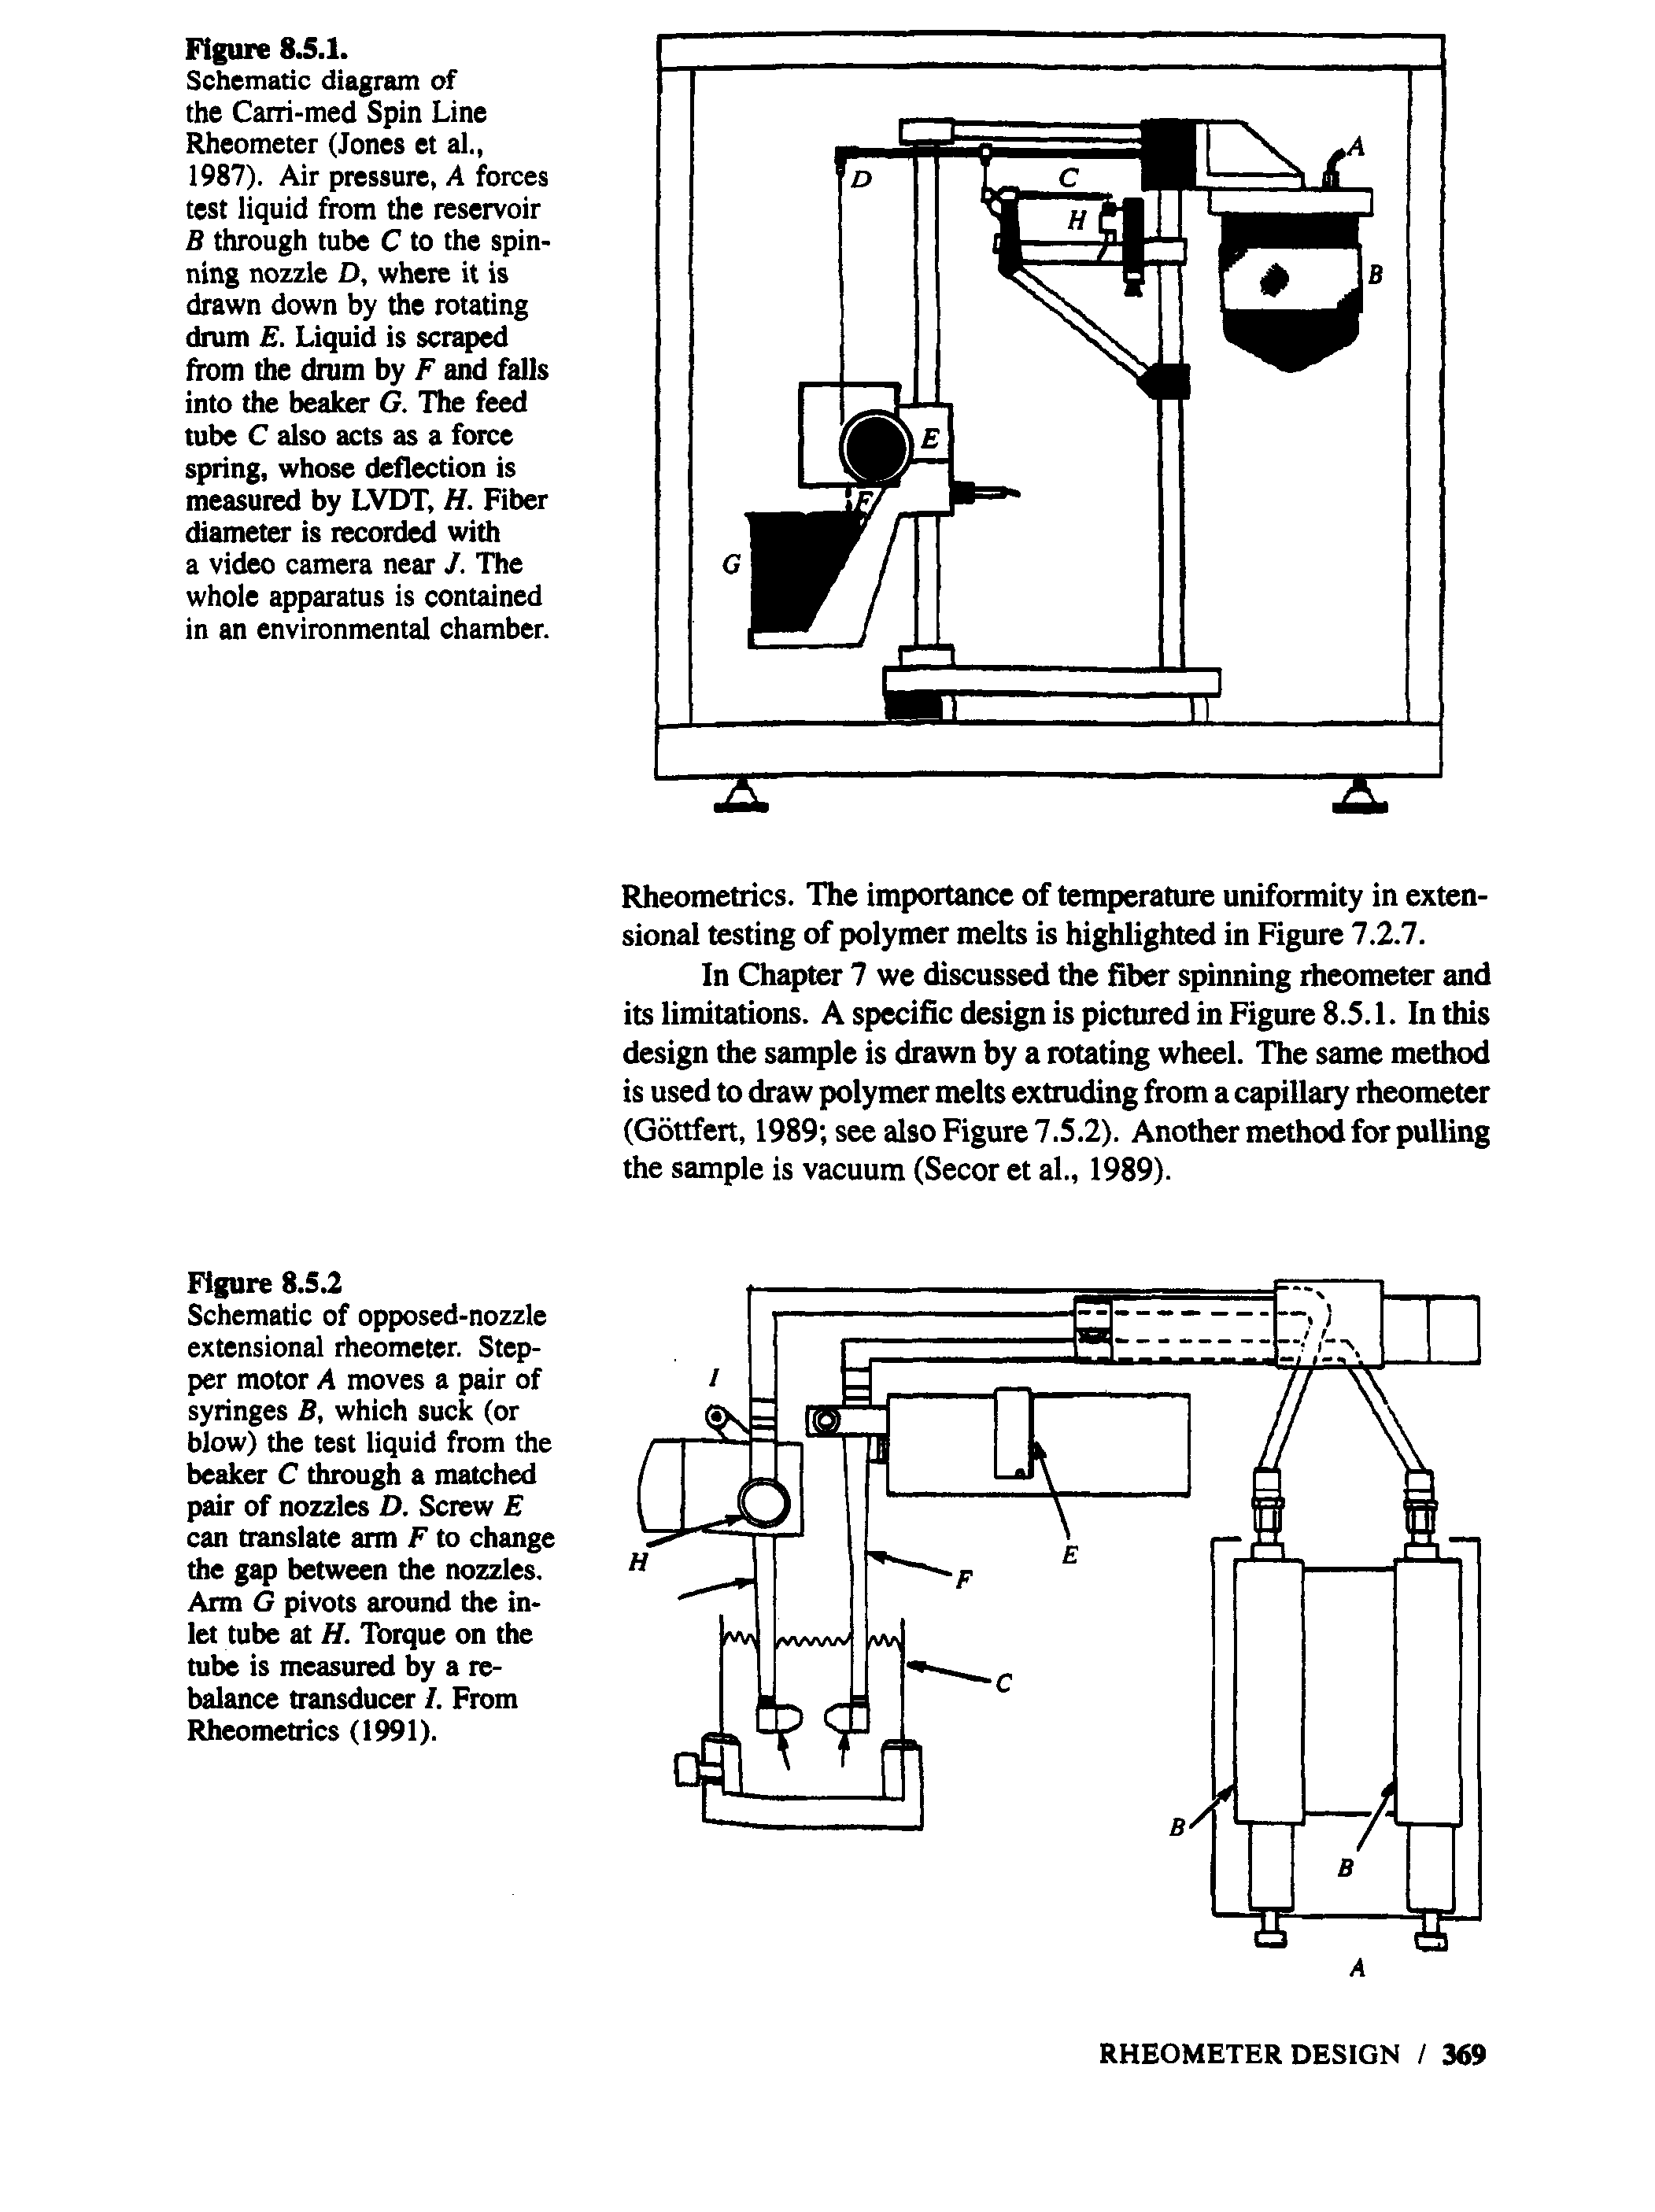 Schematic of opposed-nozzle extensional rheometer. Stepper motor A moves a pair of syringes B, which suck (or blow) the test liquid from the beaker C through a matched pair of nozzles D. Screw E can translate arm F to change the gap between the nozzles. Arm G pivots around the inlet tube at H. Torque on the tube is measured by a rebalance transducer /. From Rheometrics (1991).